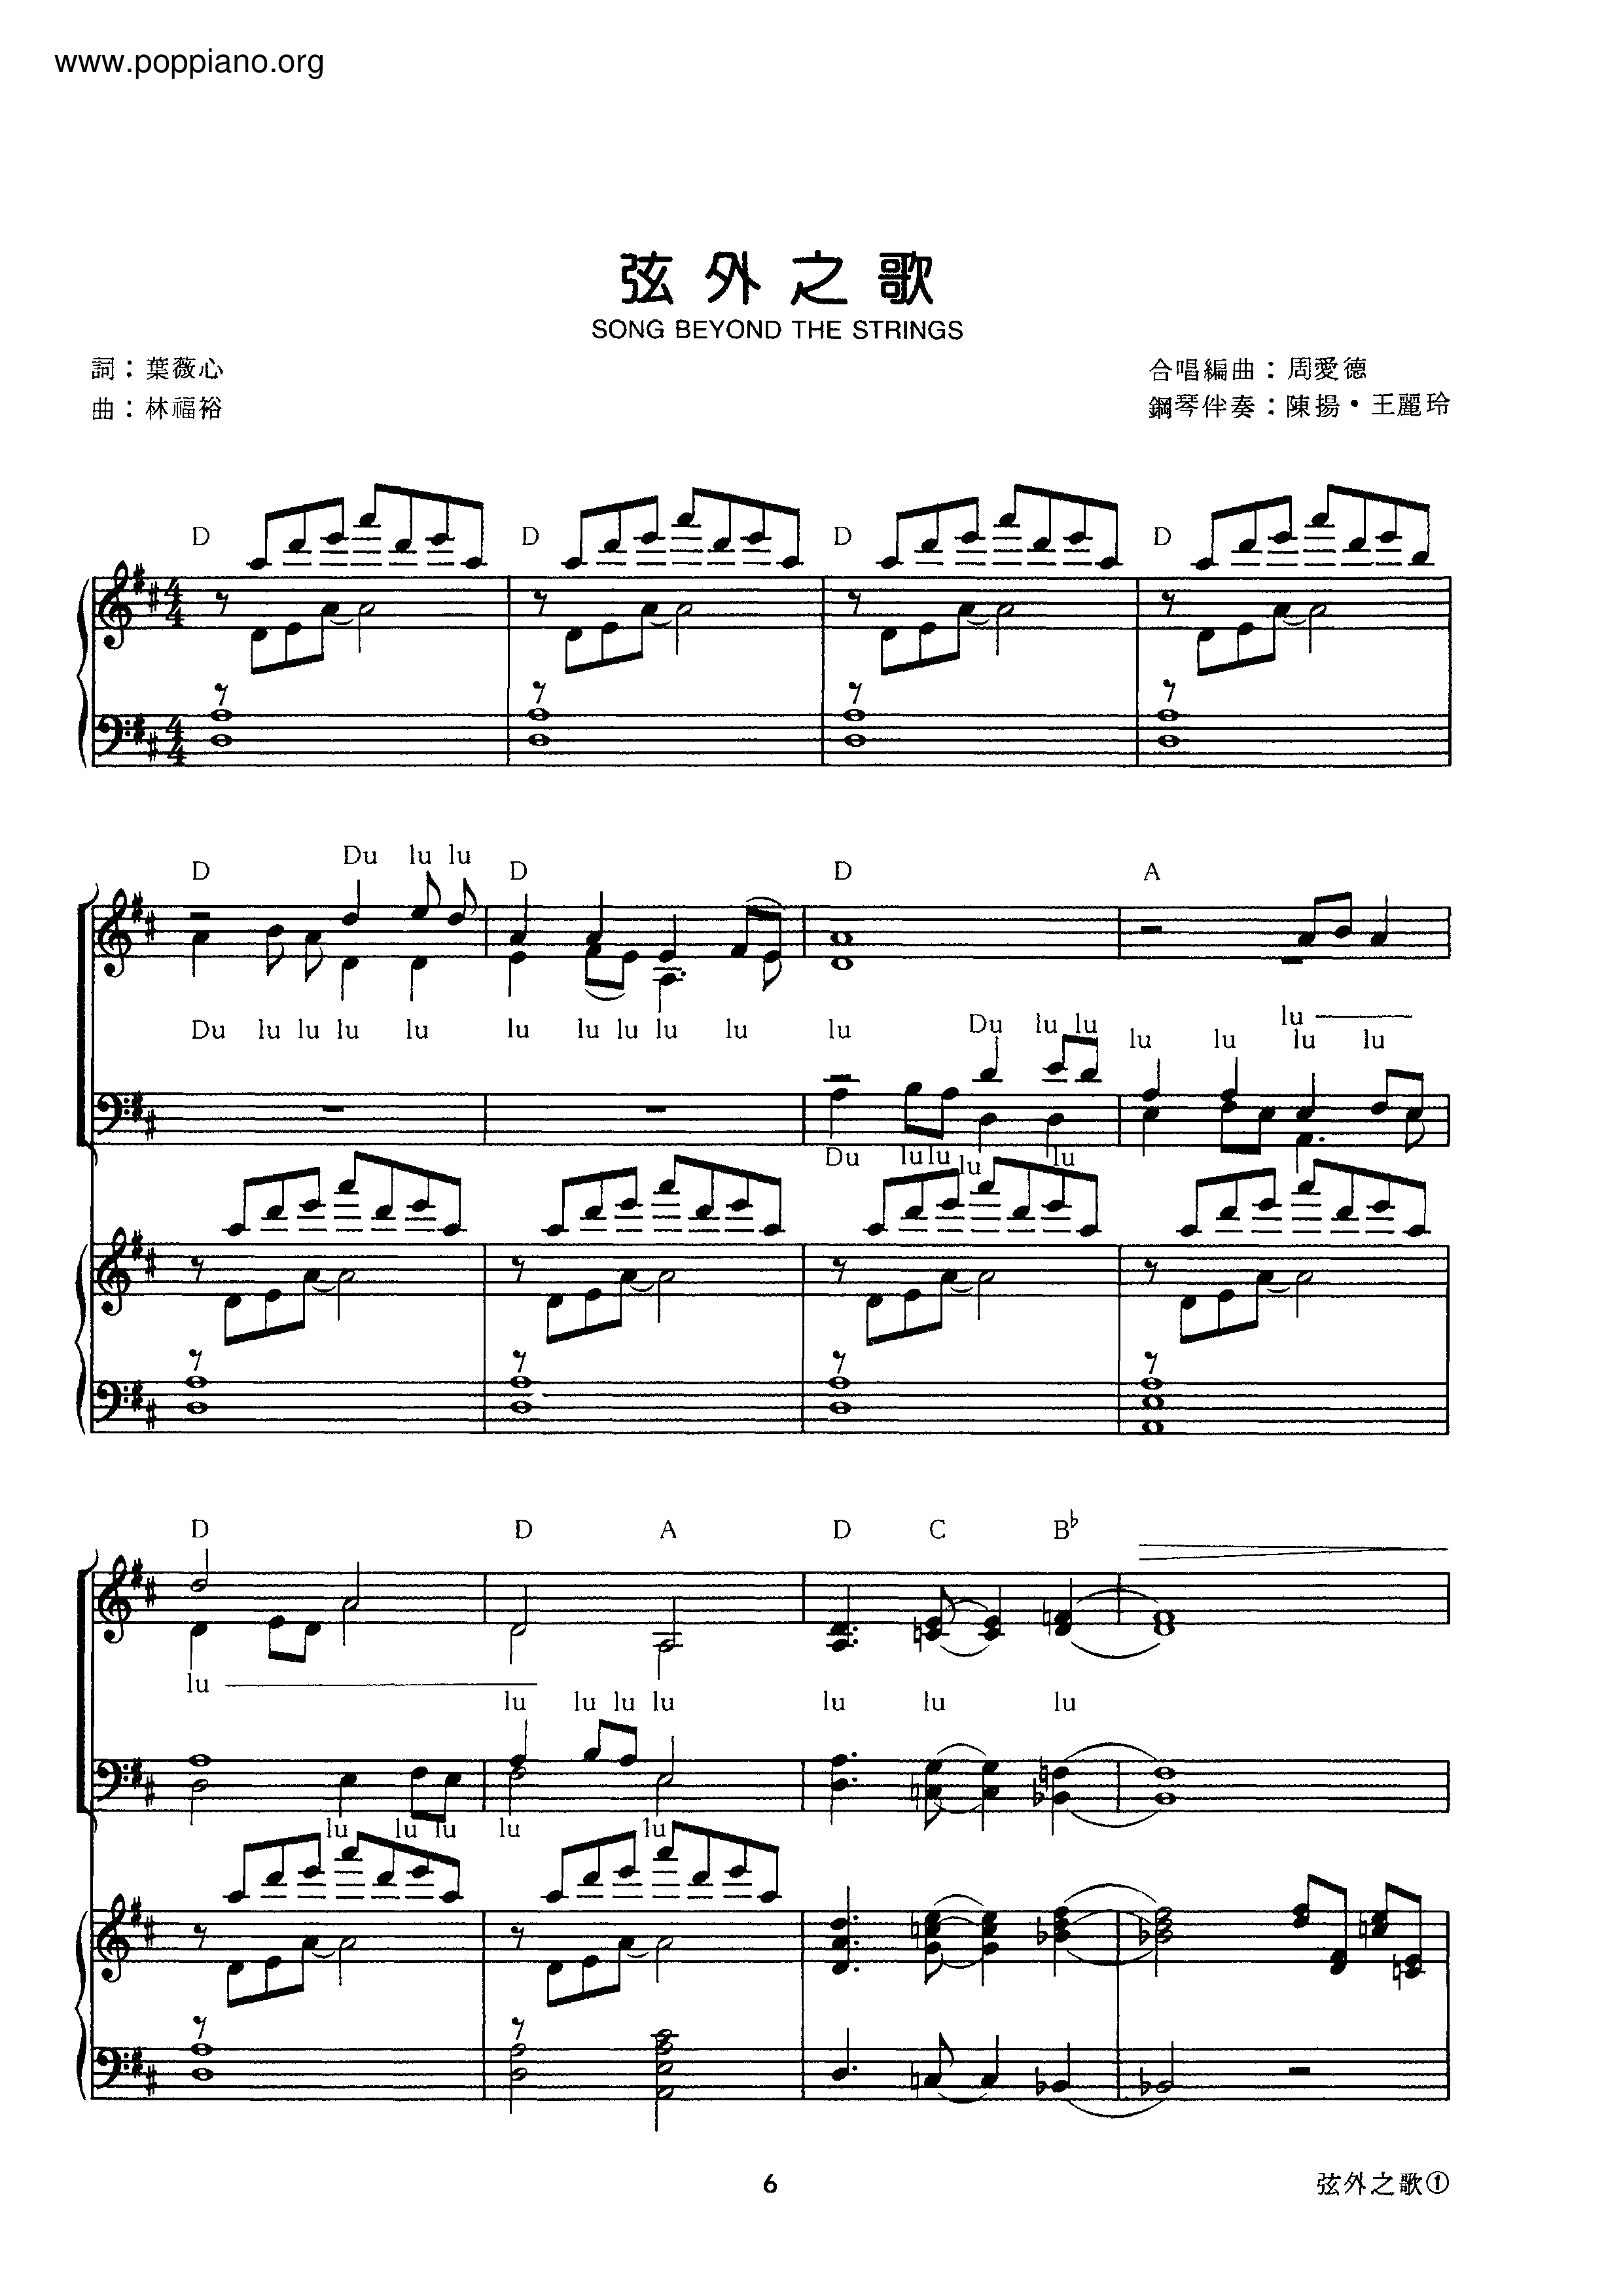 String Song Score